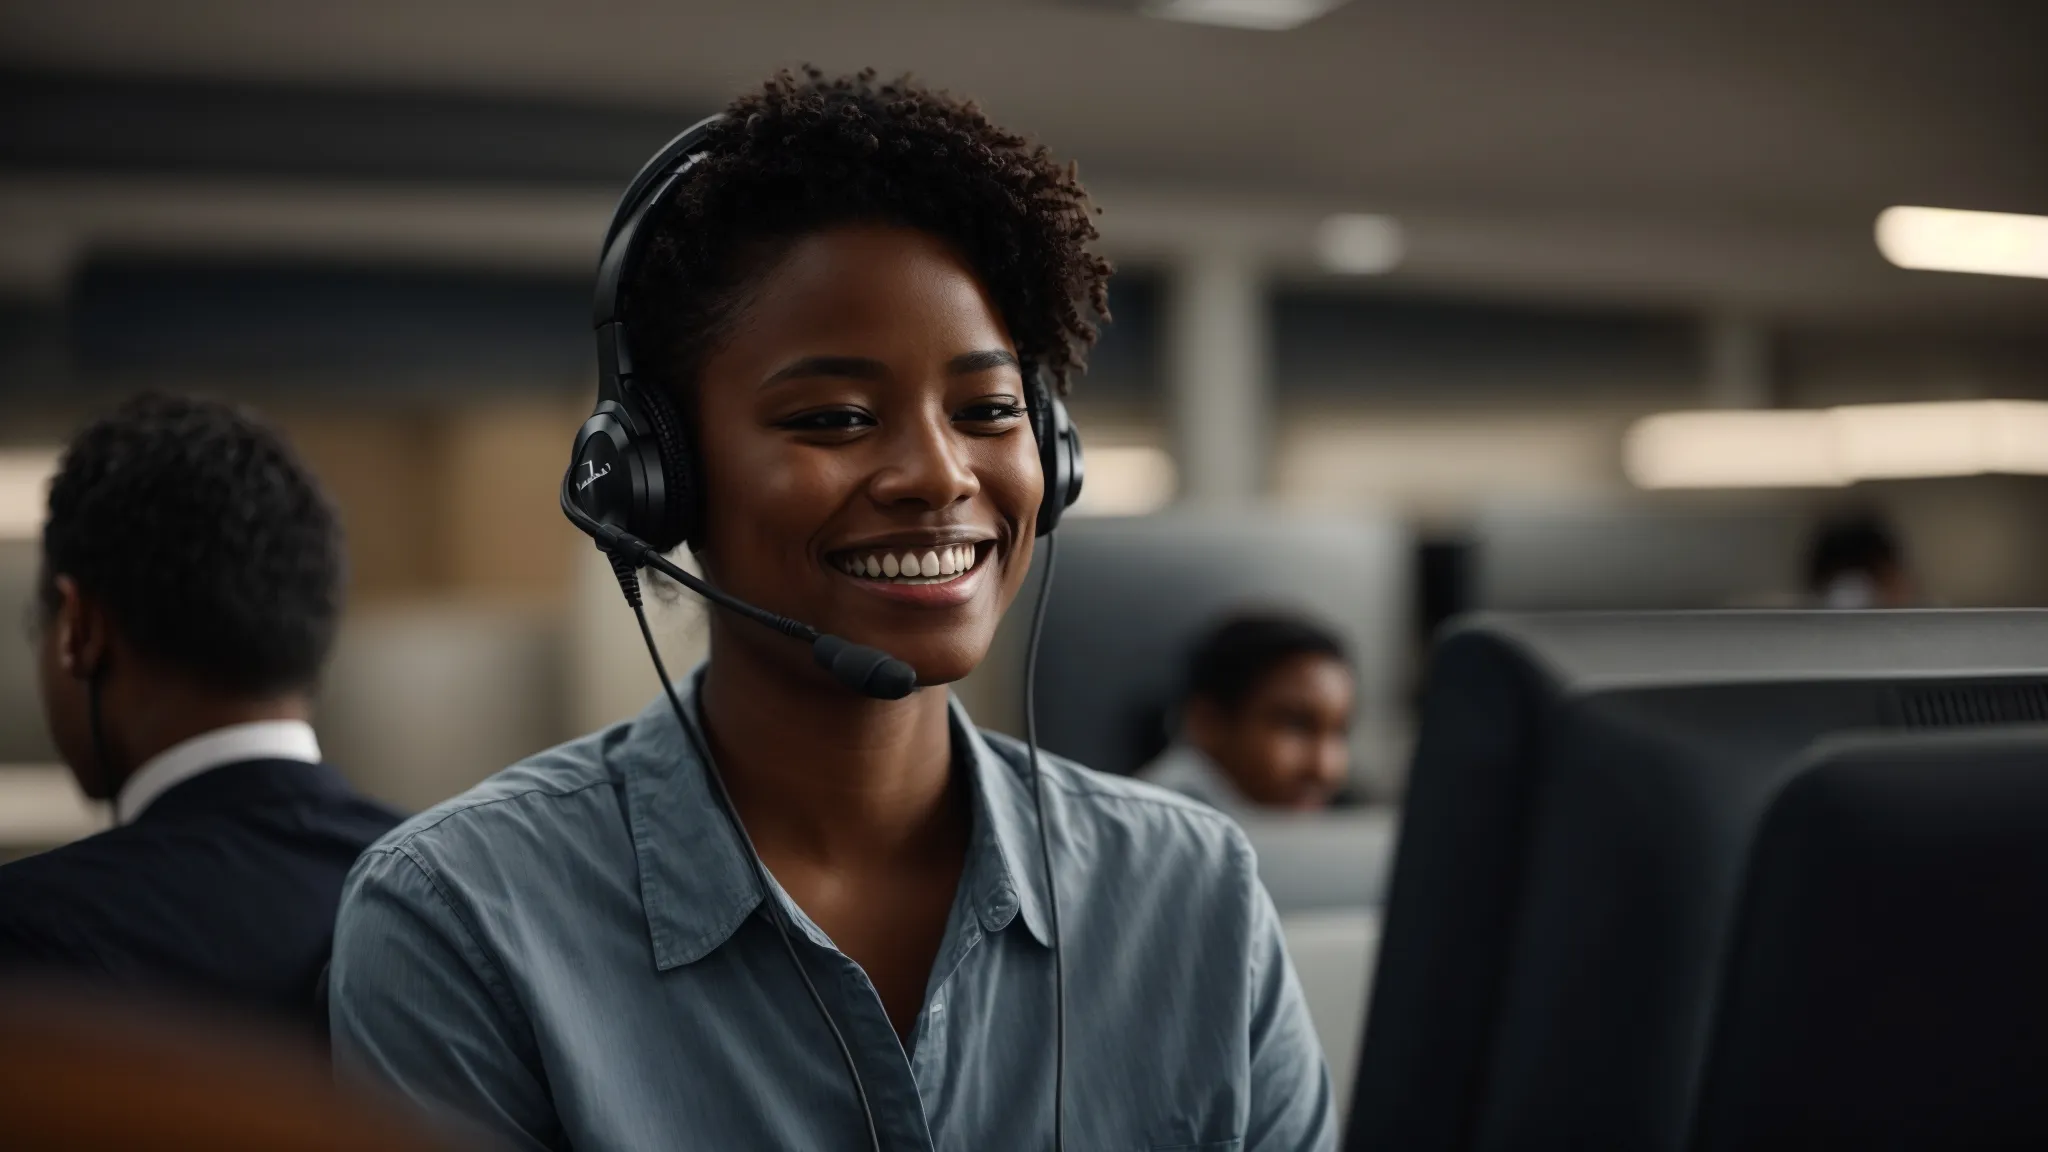 a customer service representative smiles warmly while wearing a headset, focusing intently on a computer screen with an open chat interface.